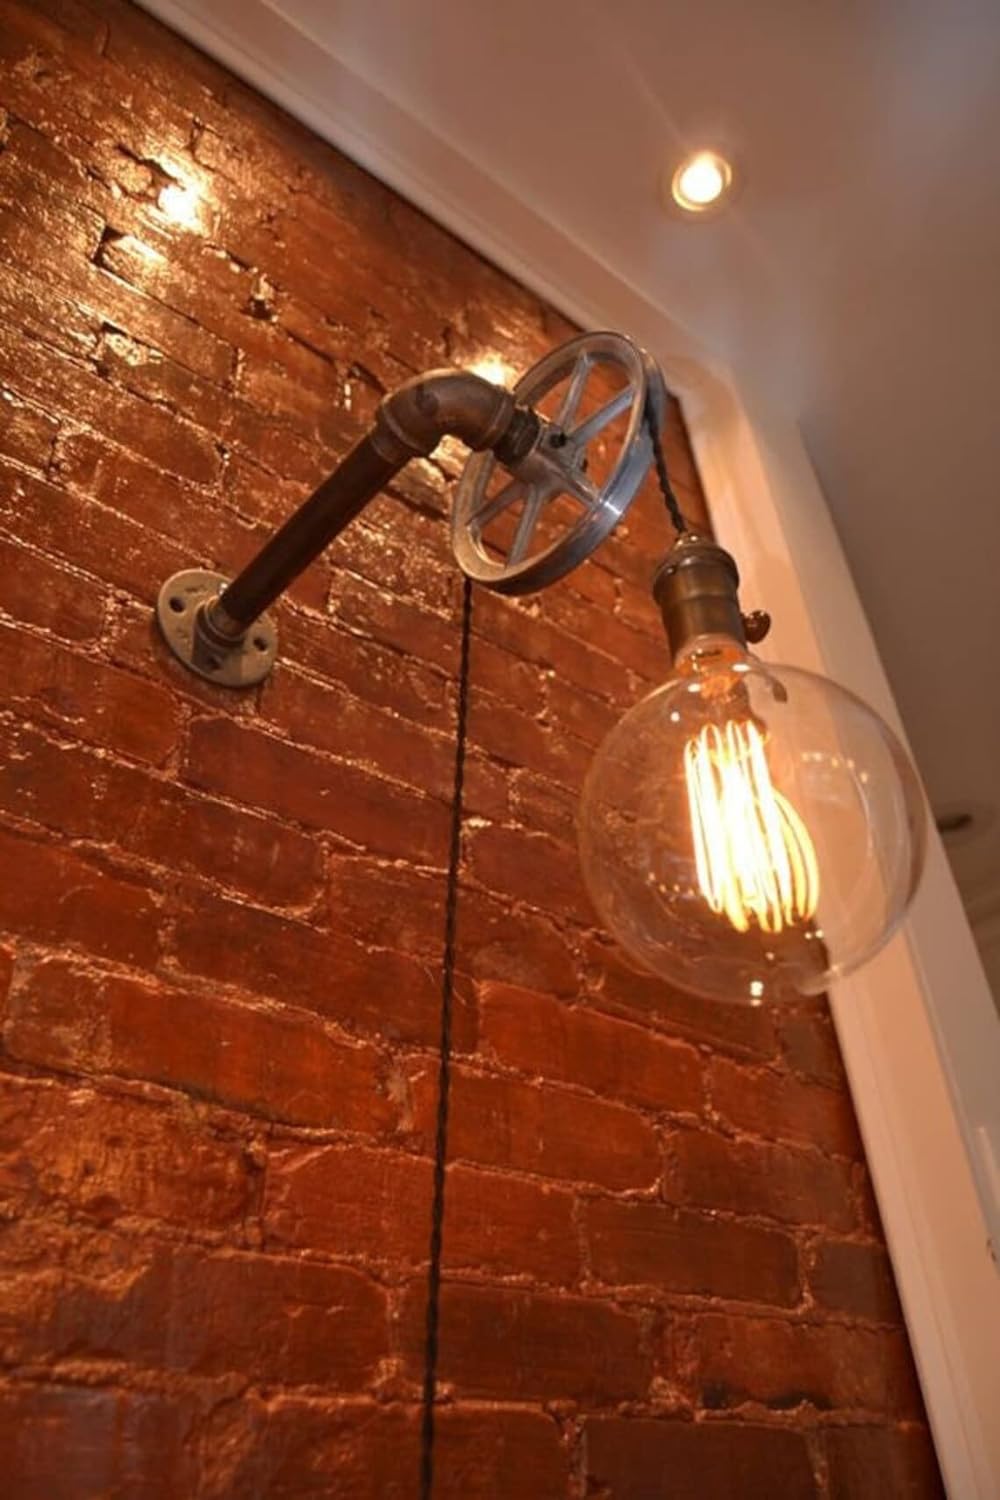 Exton Industrial Pulley Light